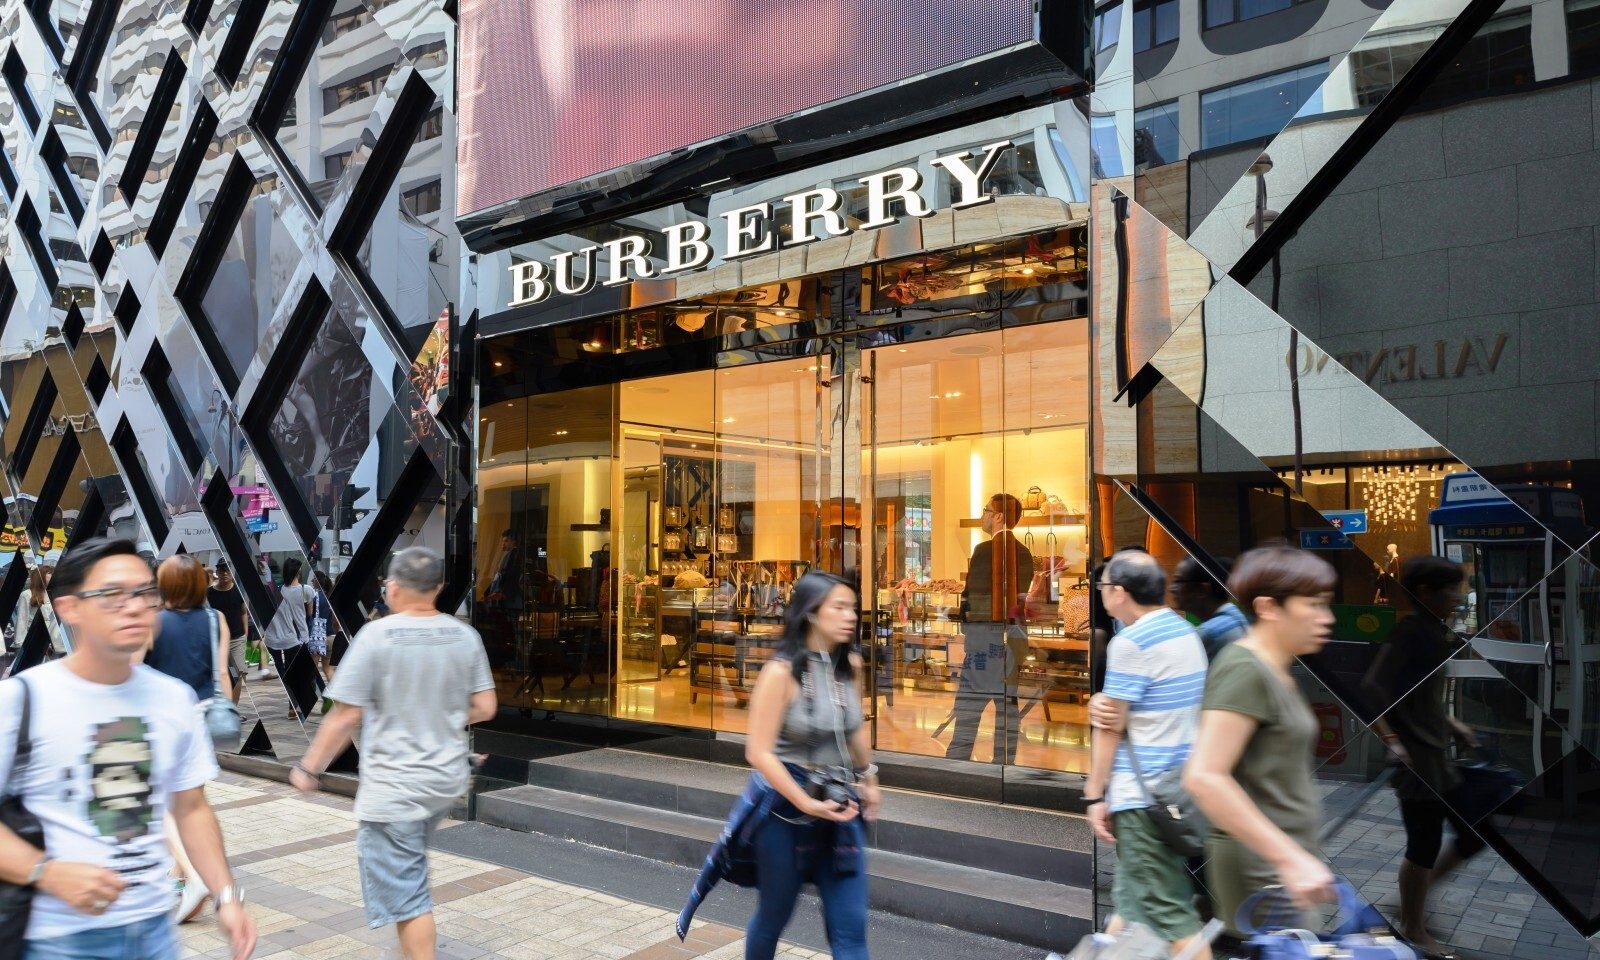 UK exporter Burberry prepares to fight takeover